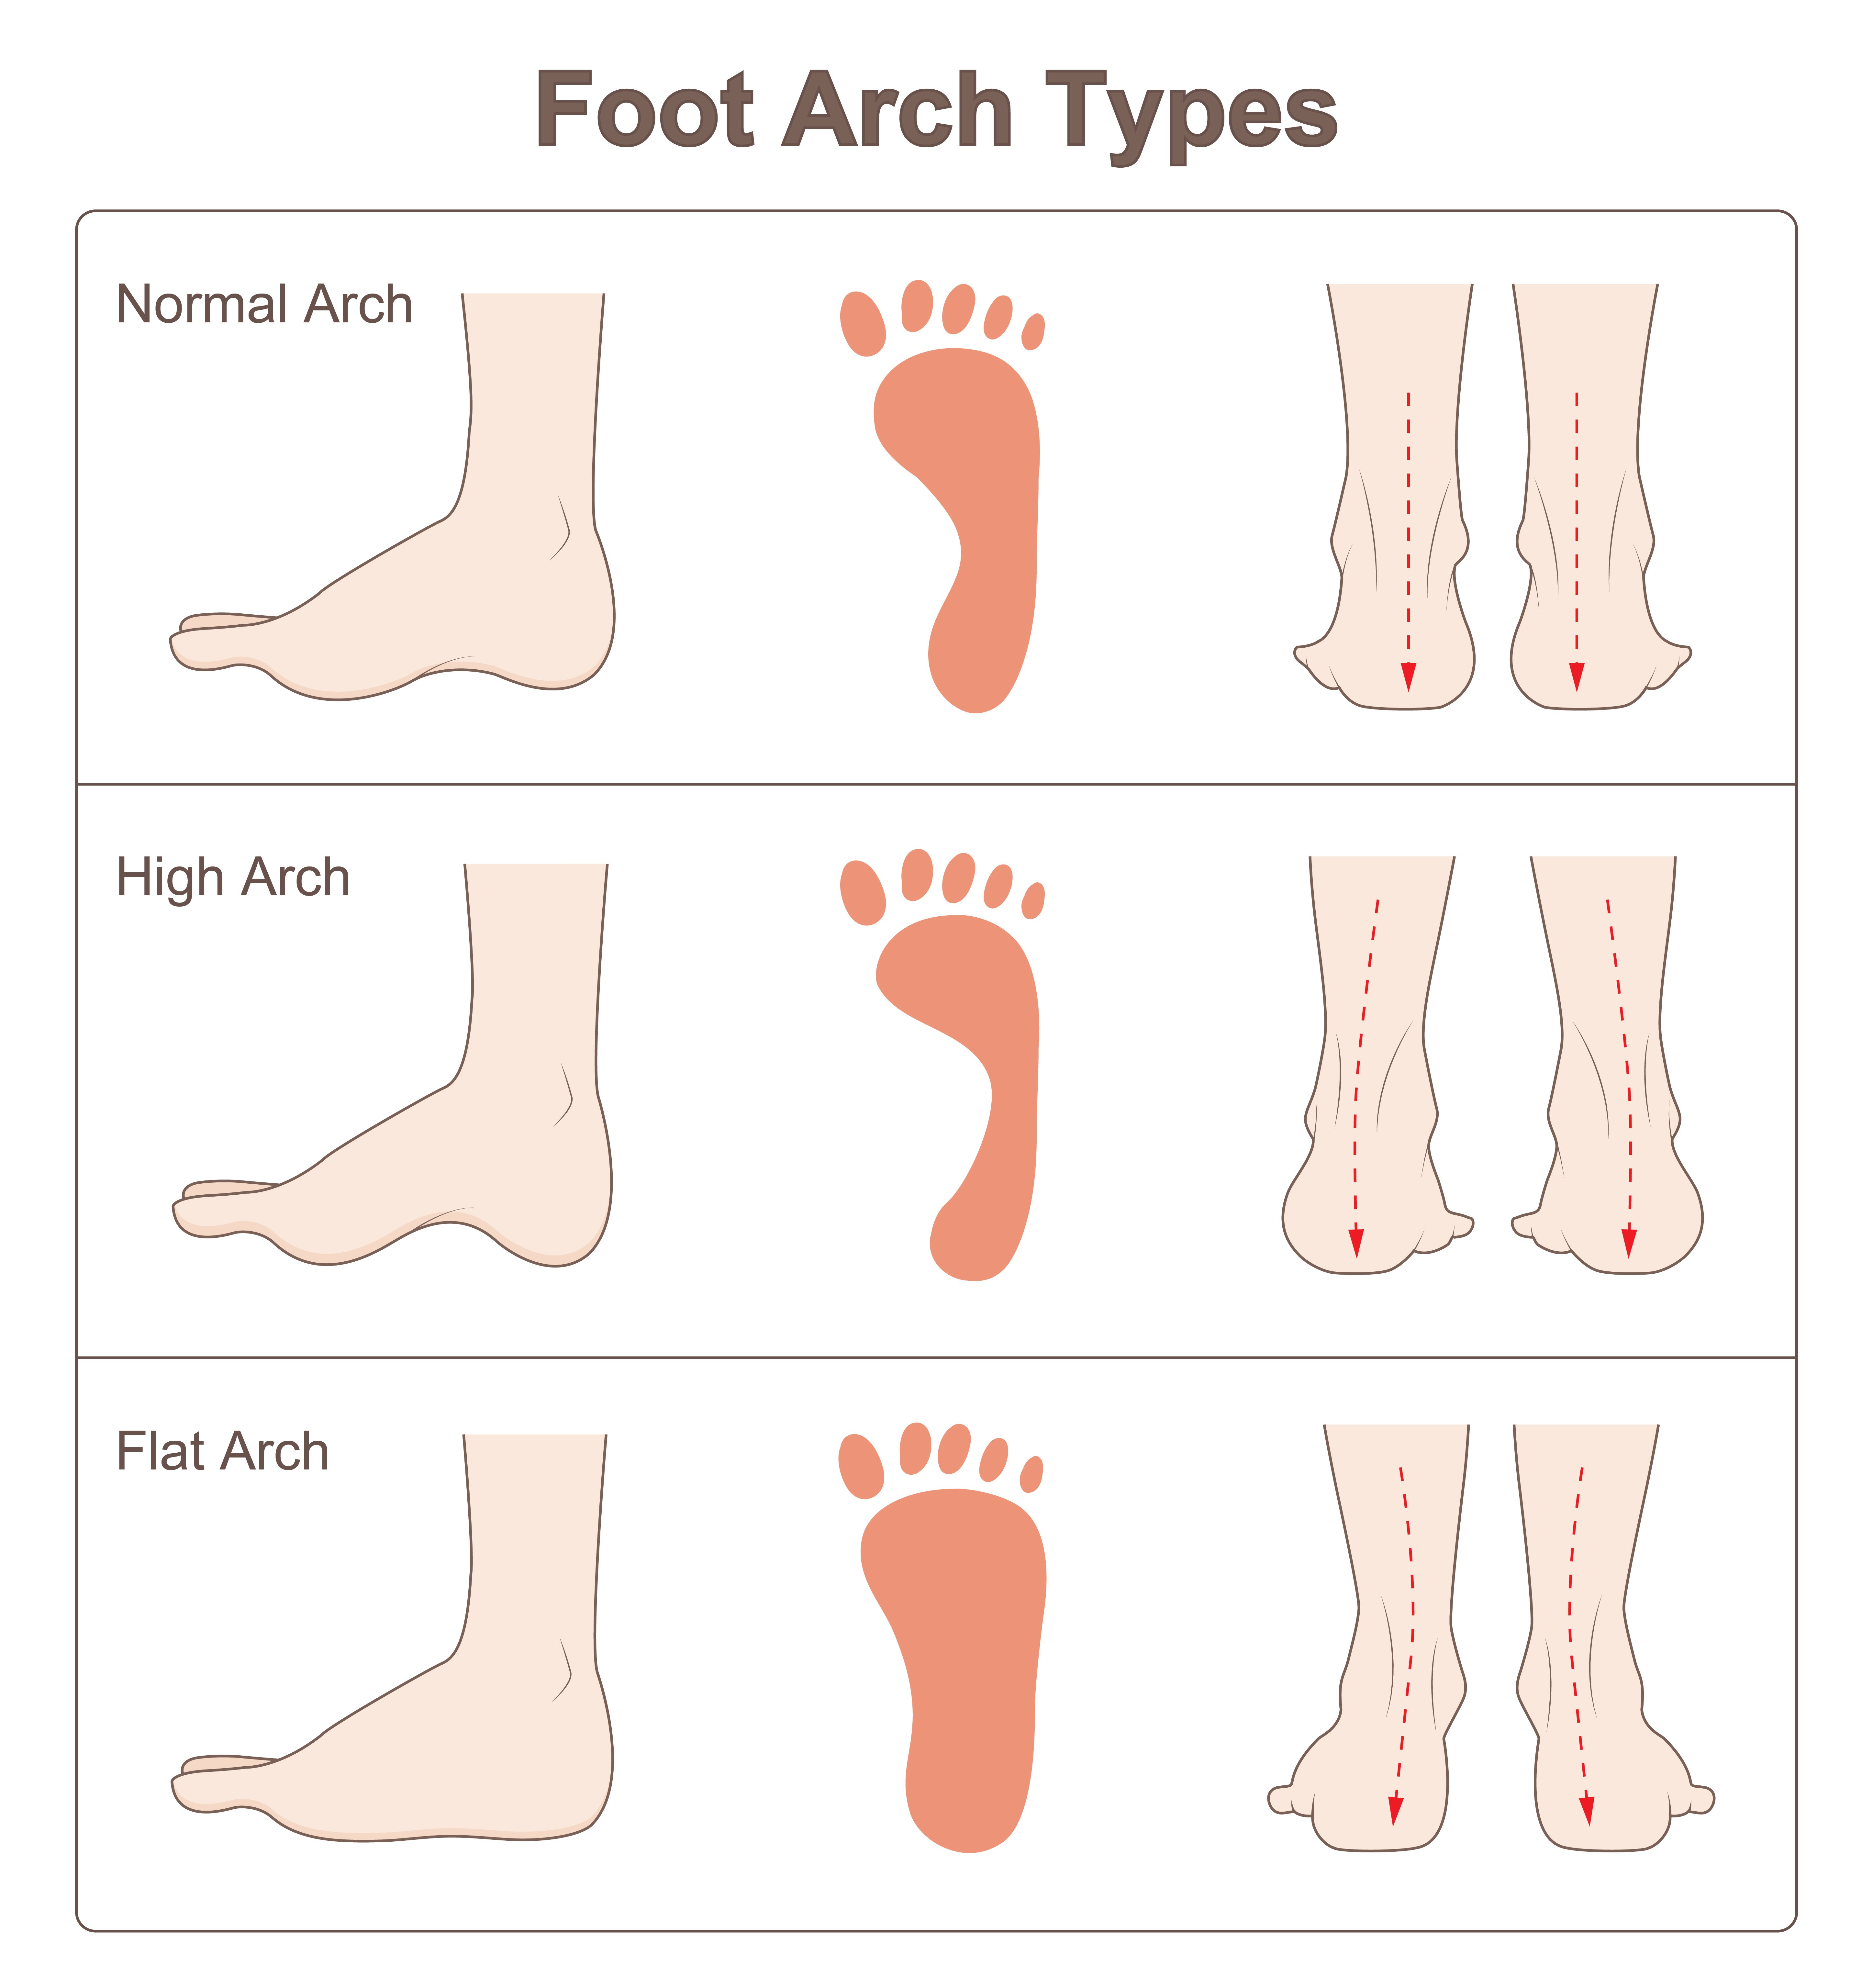 Image of Foot Arch Types